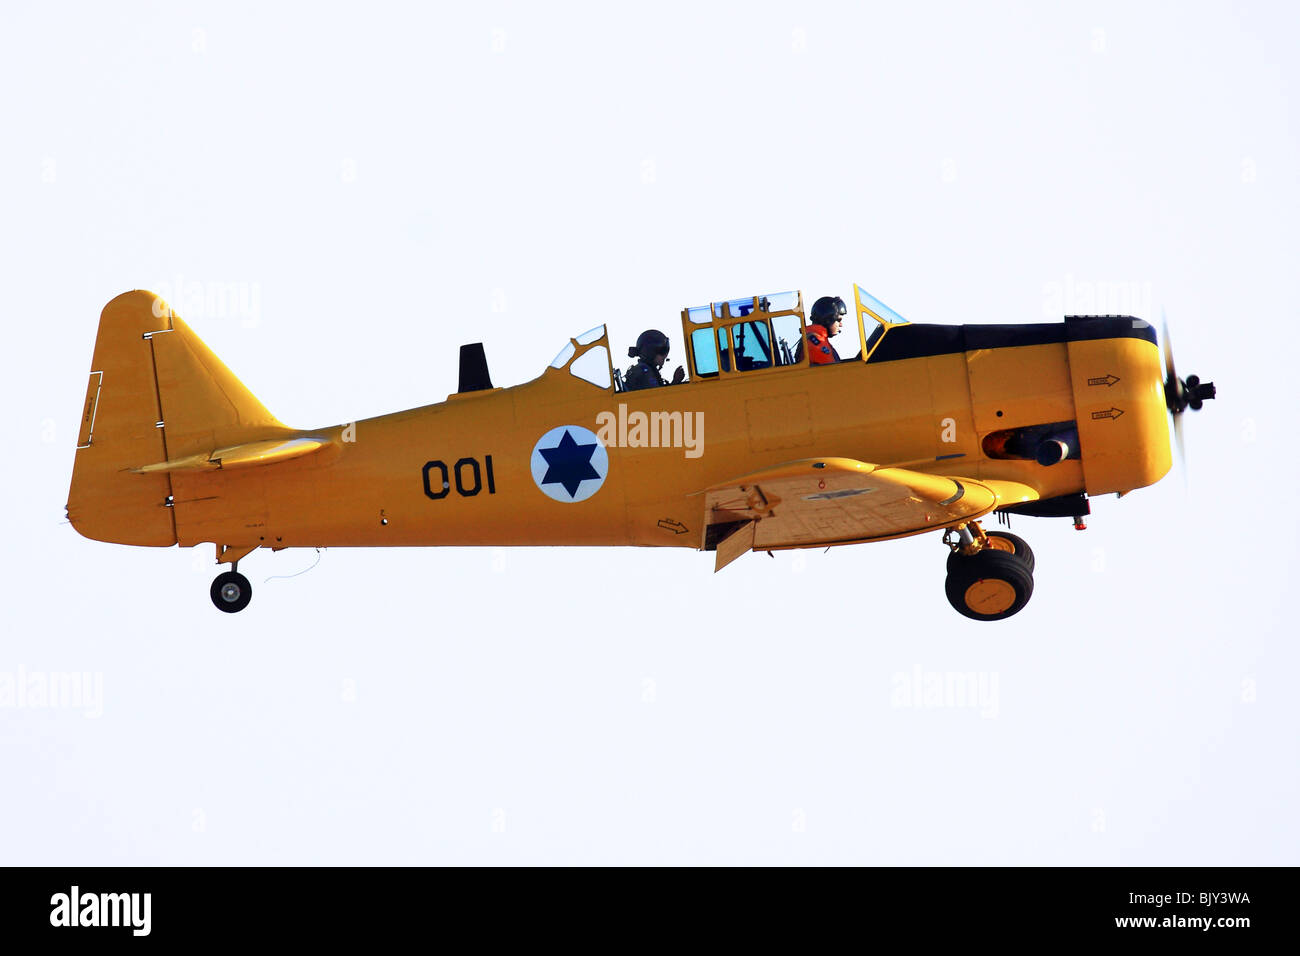 Israeli Air force North American Aviation T-6 Texan single-engine advanced trainer aircraft in flight Stock Photo